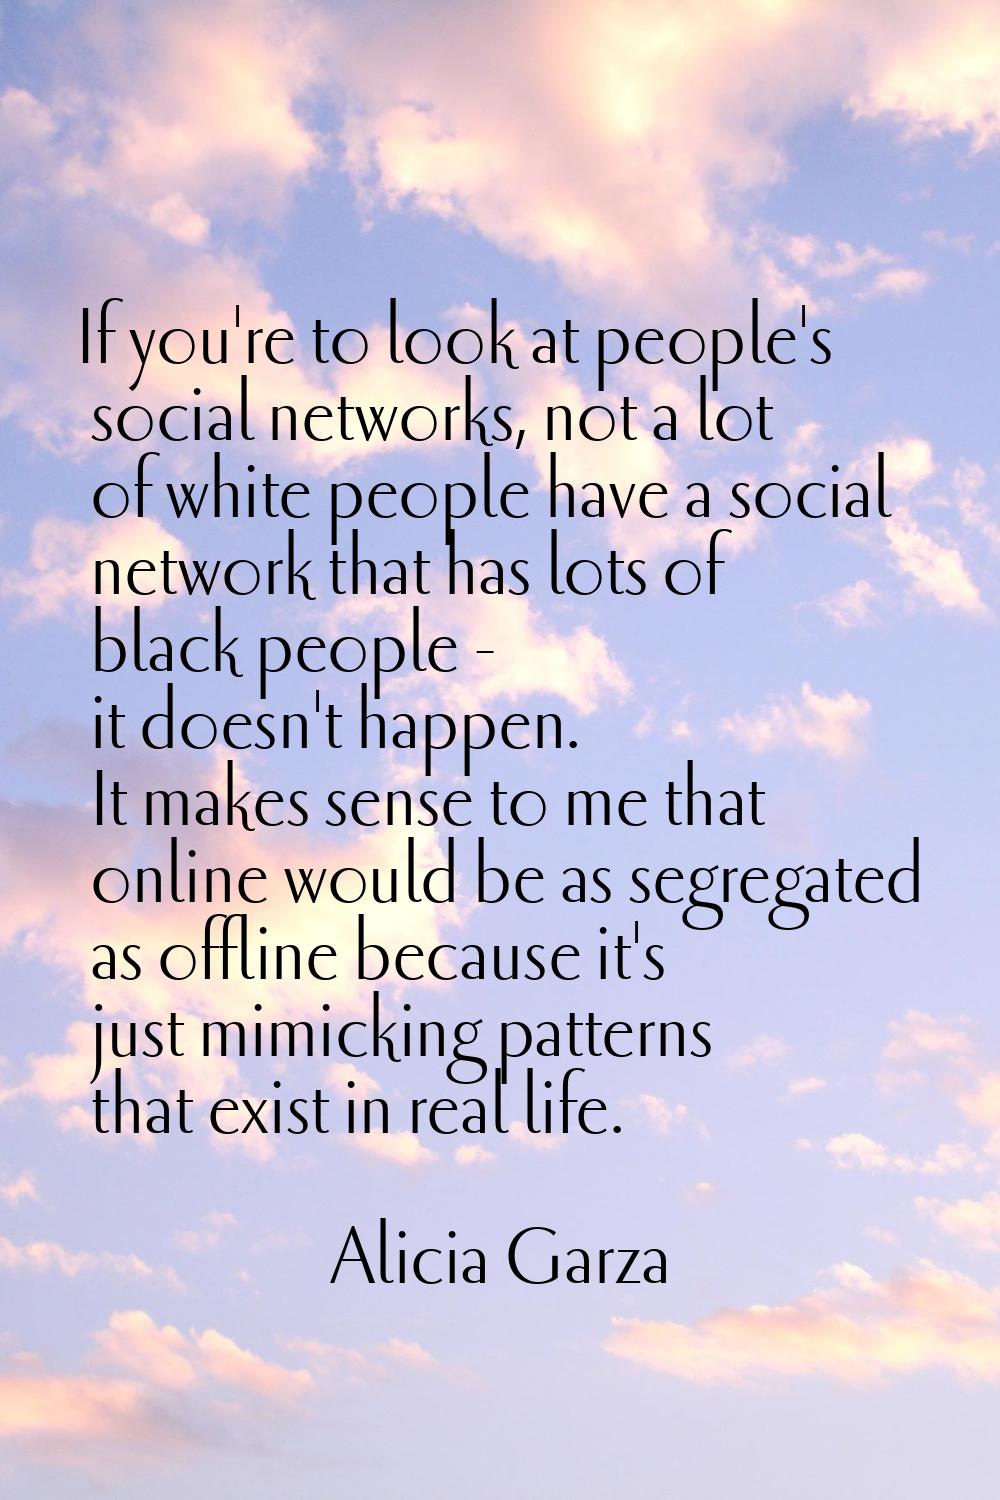 If you're to look at people's social networks, not a lot of white people have a social network that